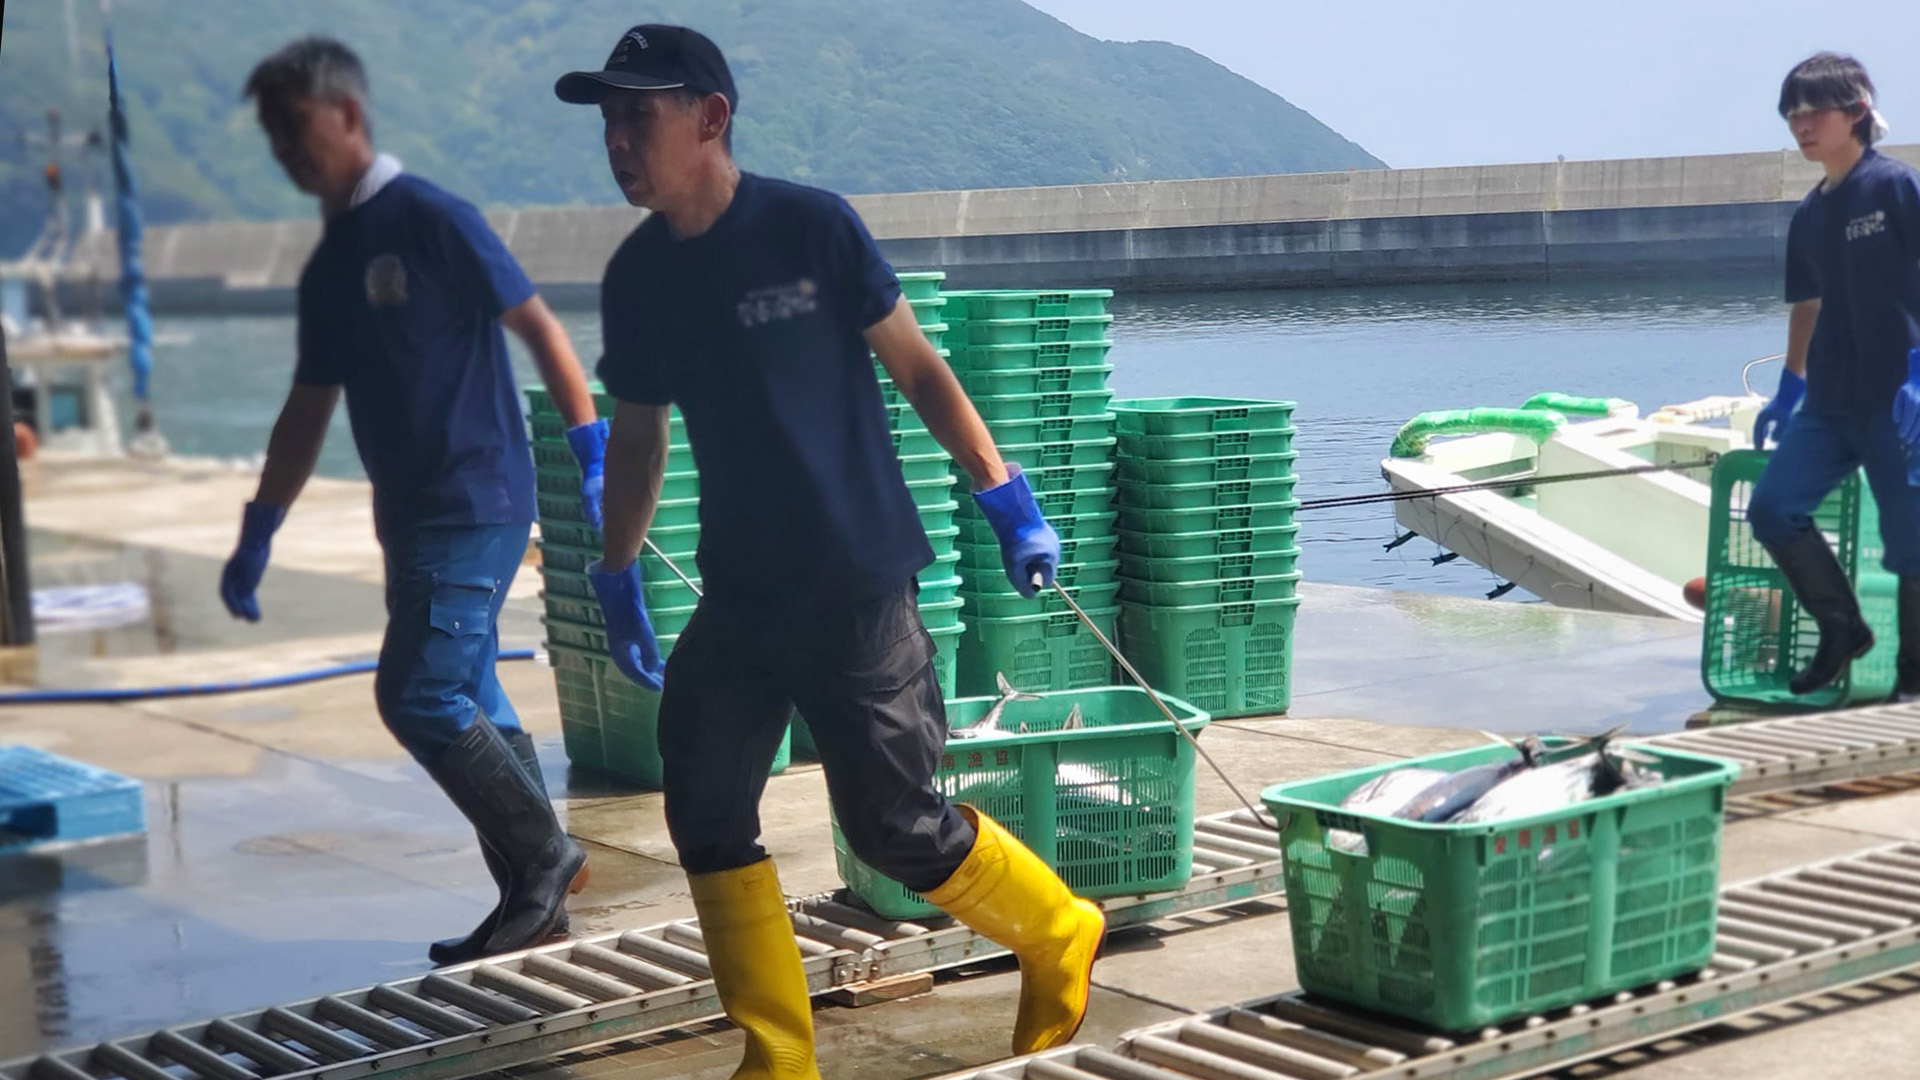 UMIGYO IN SMALL-SCALE FISHERIES IN JAPAN: HOW PROTECTING LIFE